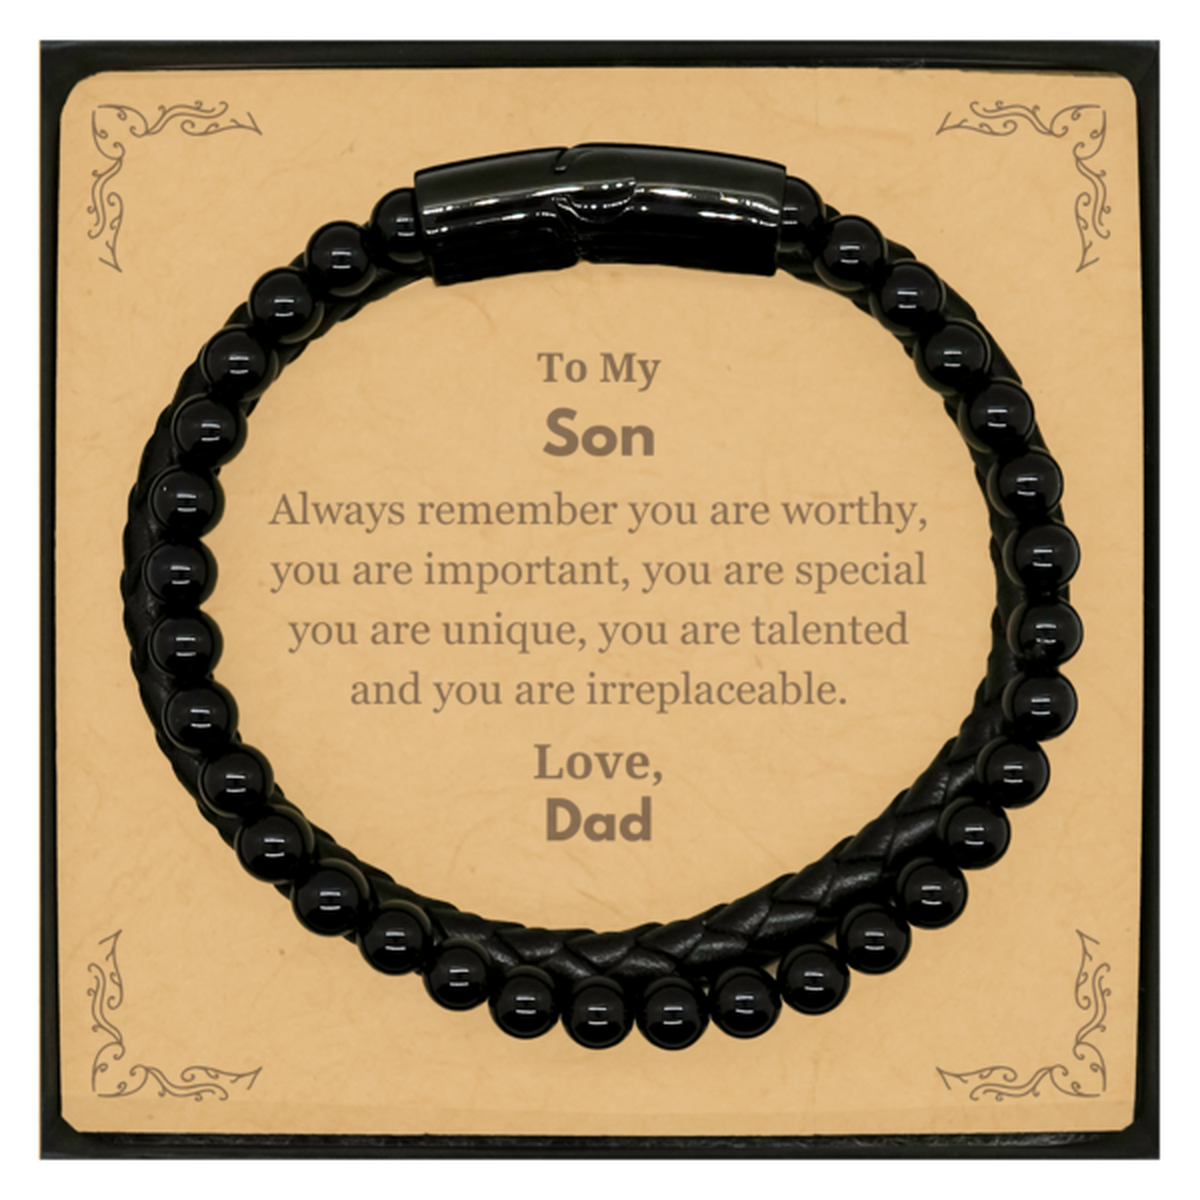 Son Birthday Gifts from Dad, Inspirational Stone Leather Bracelets for Son Christmas Graduation Gifts for Son Always remember you are worthy, you are important. Love, Dad